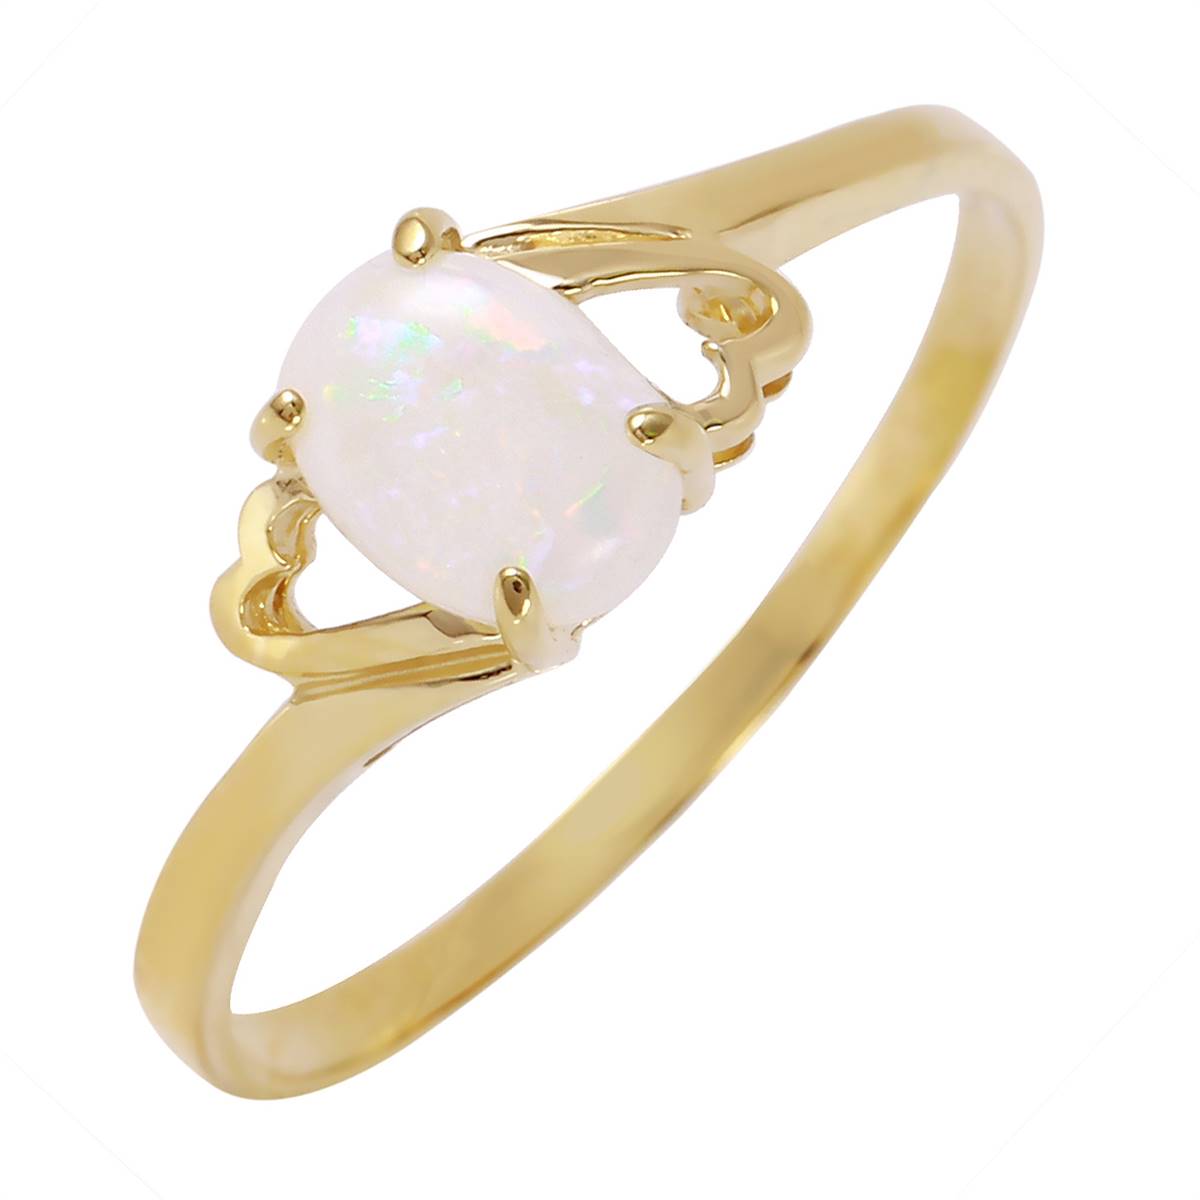 0.45 Carat 14K Solid Yellow Gold Nearly Bare Opal Ring